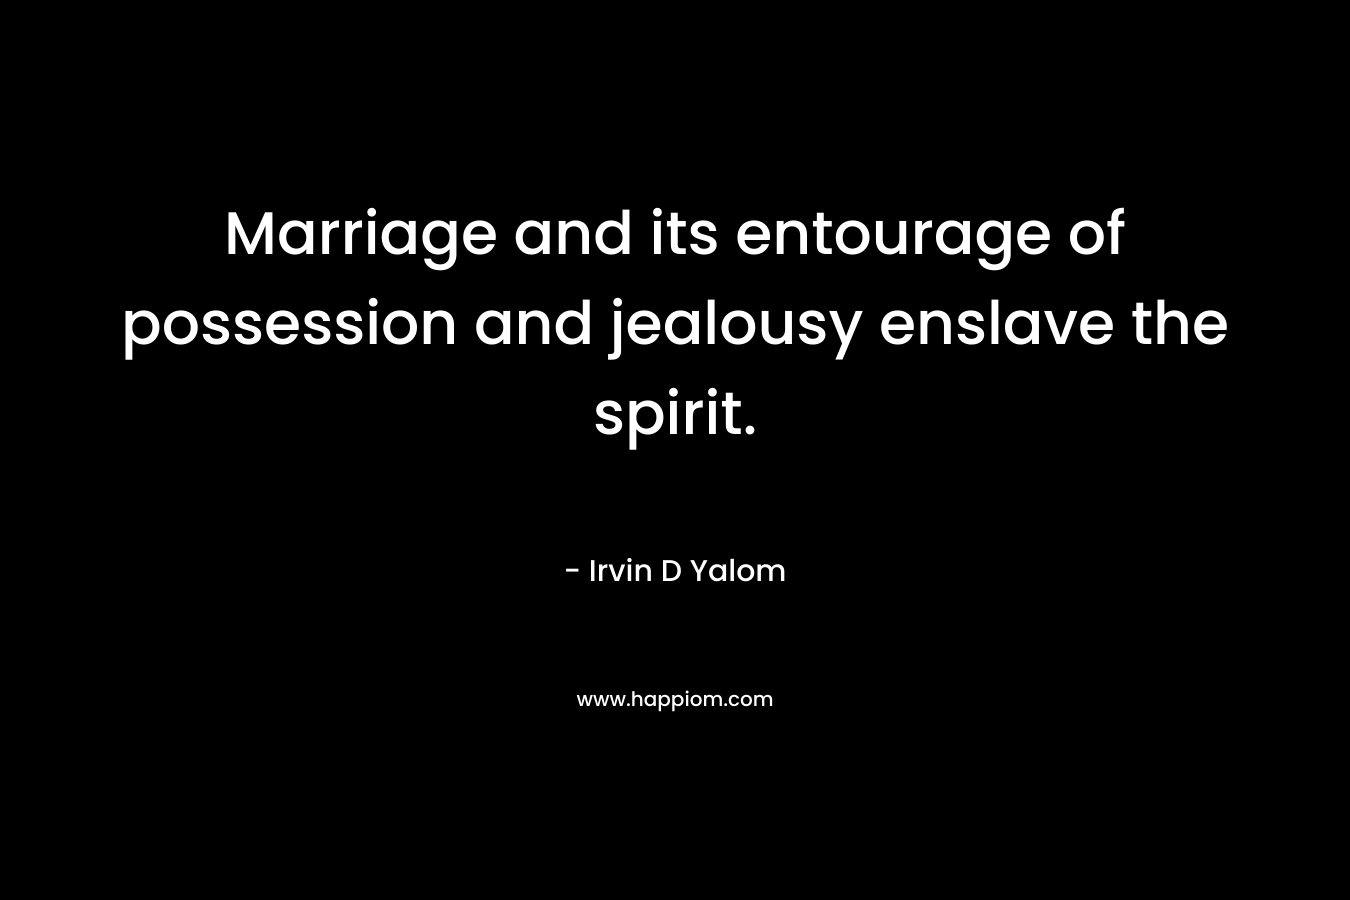 Marriage and its entourage of possession and jealousy enslave the spirit. – Irvin D Yalom